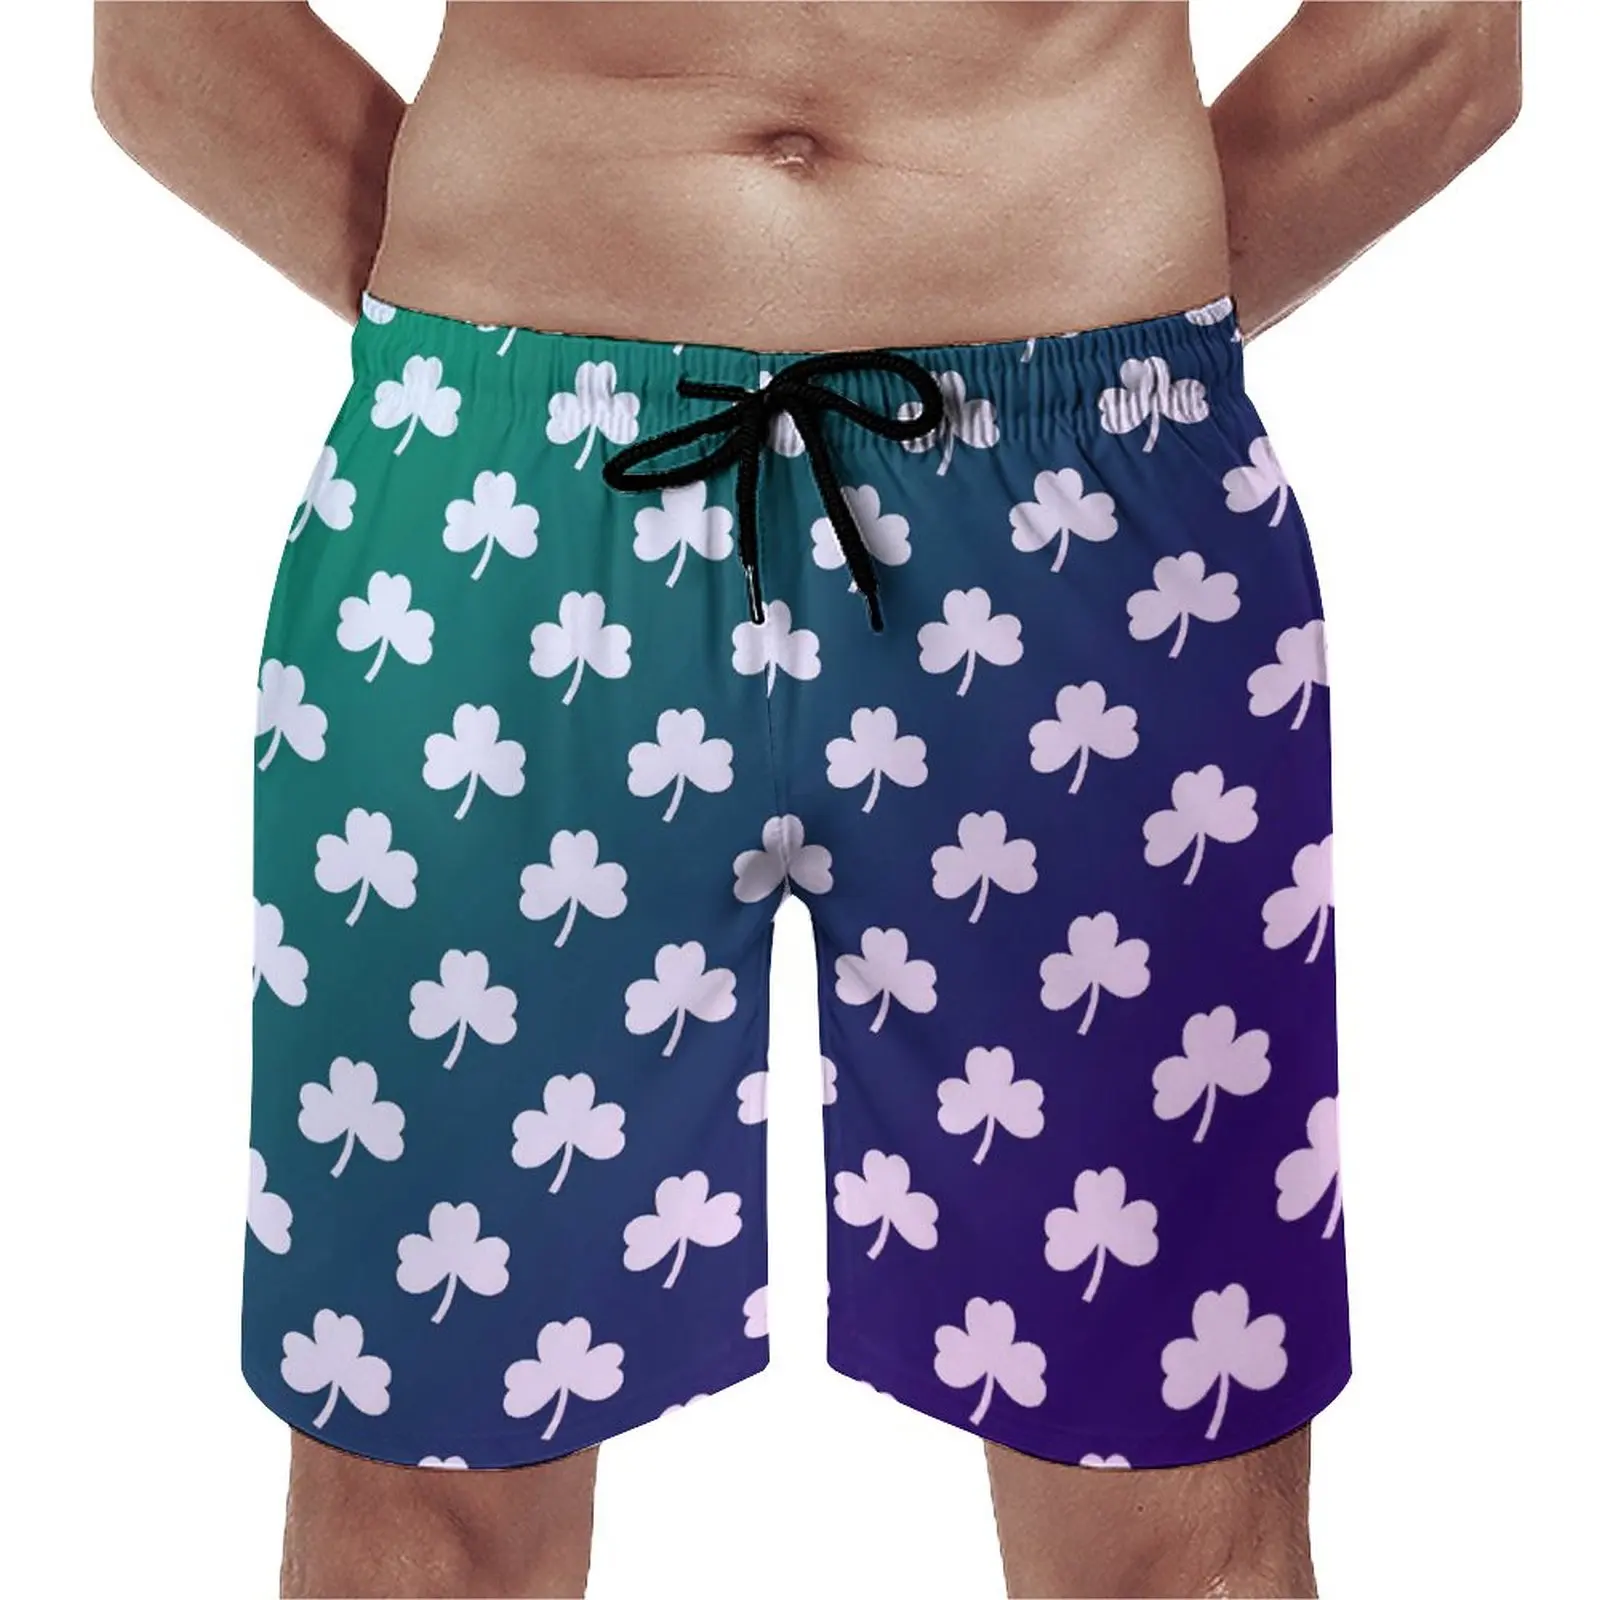 

Board Shorts Shamrock Funny Swim Trunks Blue Green Ombre Male Quick Dry Sports Fitness Hot Plus Size Beach Shorts